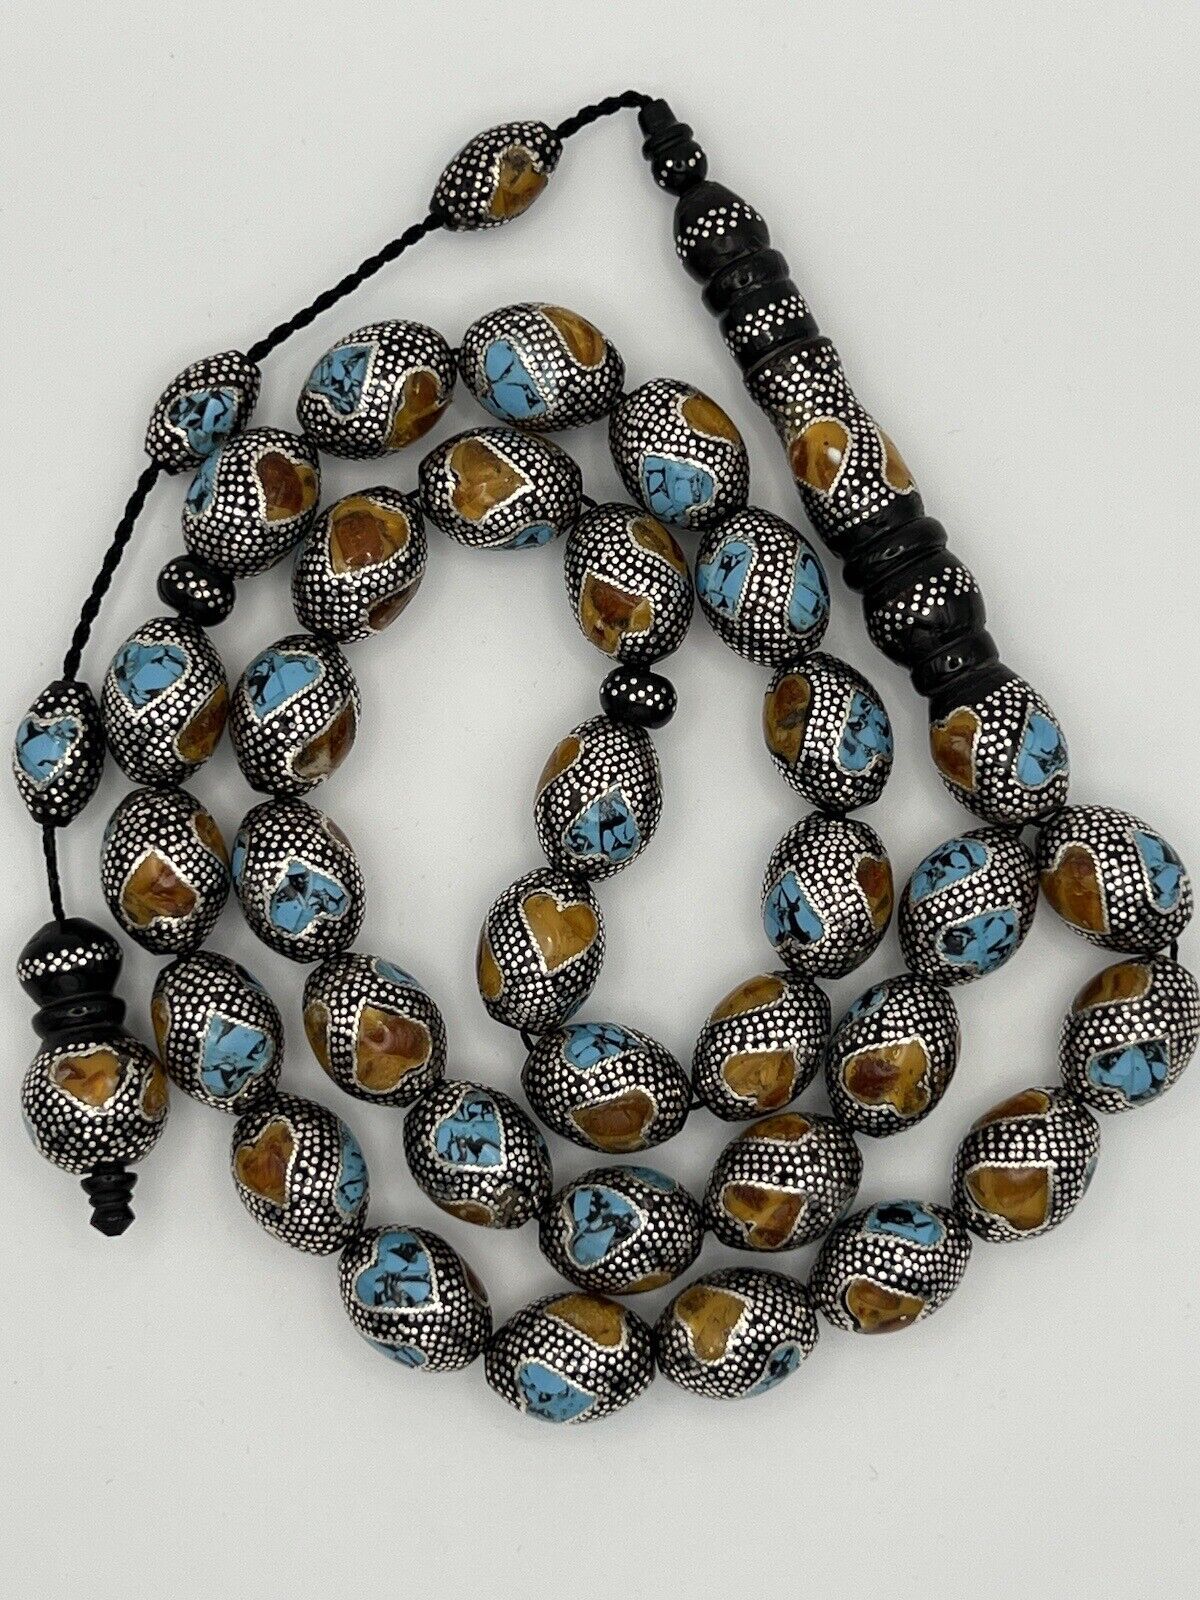 Black Coral Yusr Prayer Beads Inlaid Silver 925 Natural Amber And Turquoise